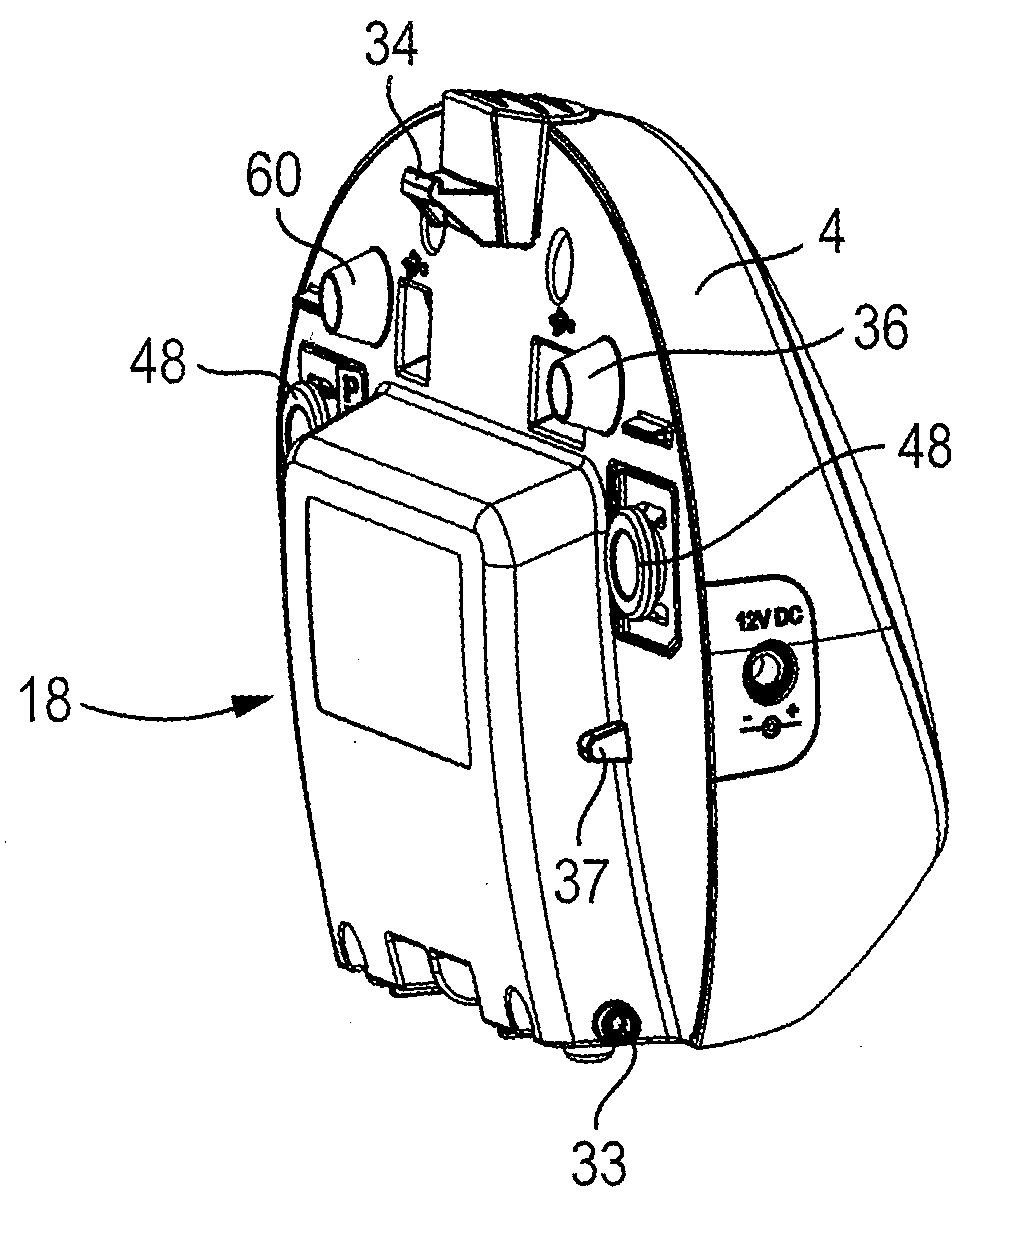 Vacuum generation device for vacuum treatment of wounds